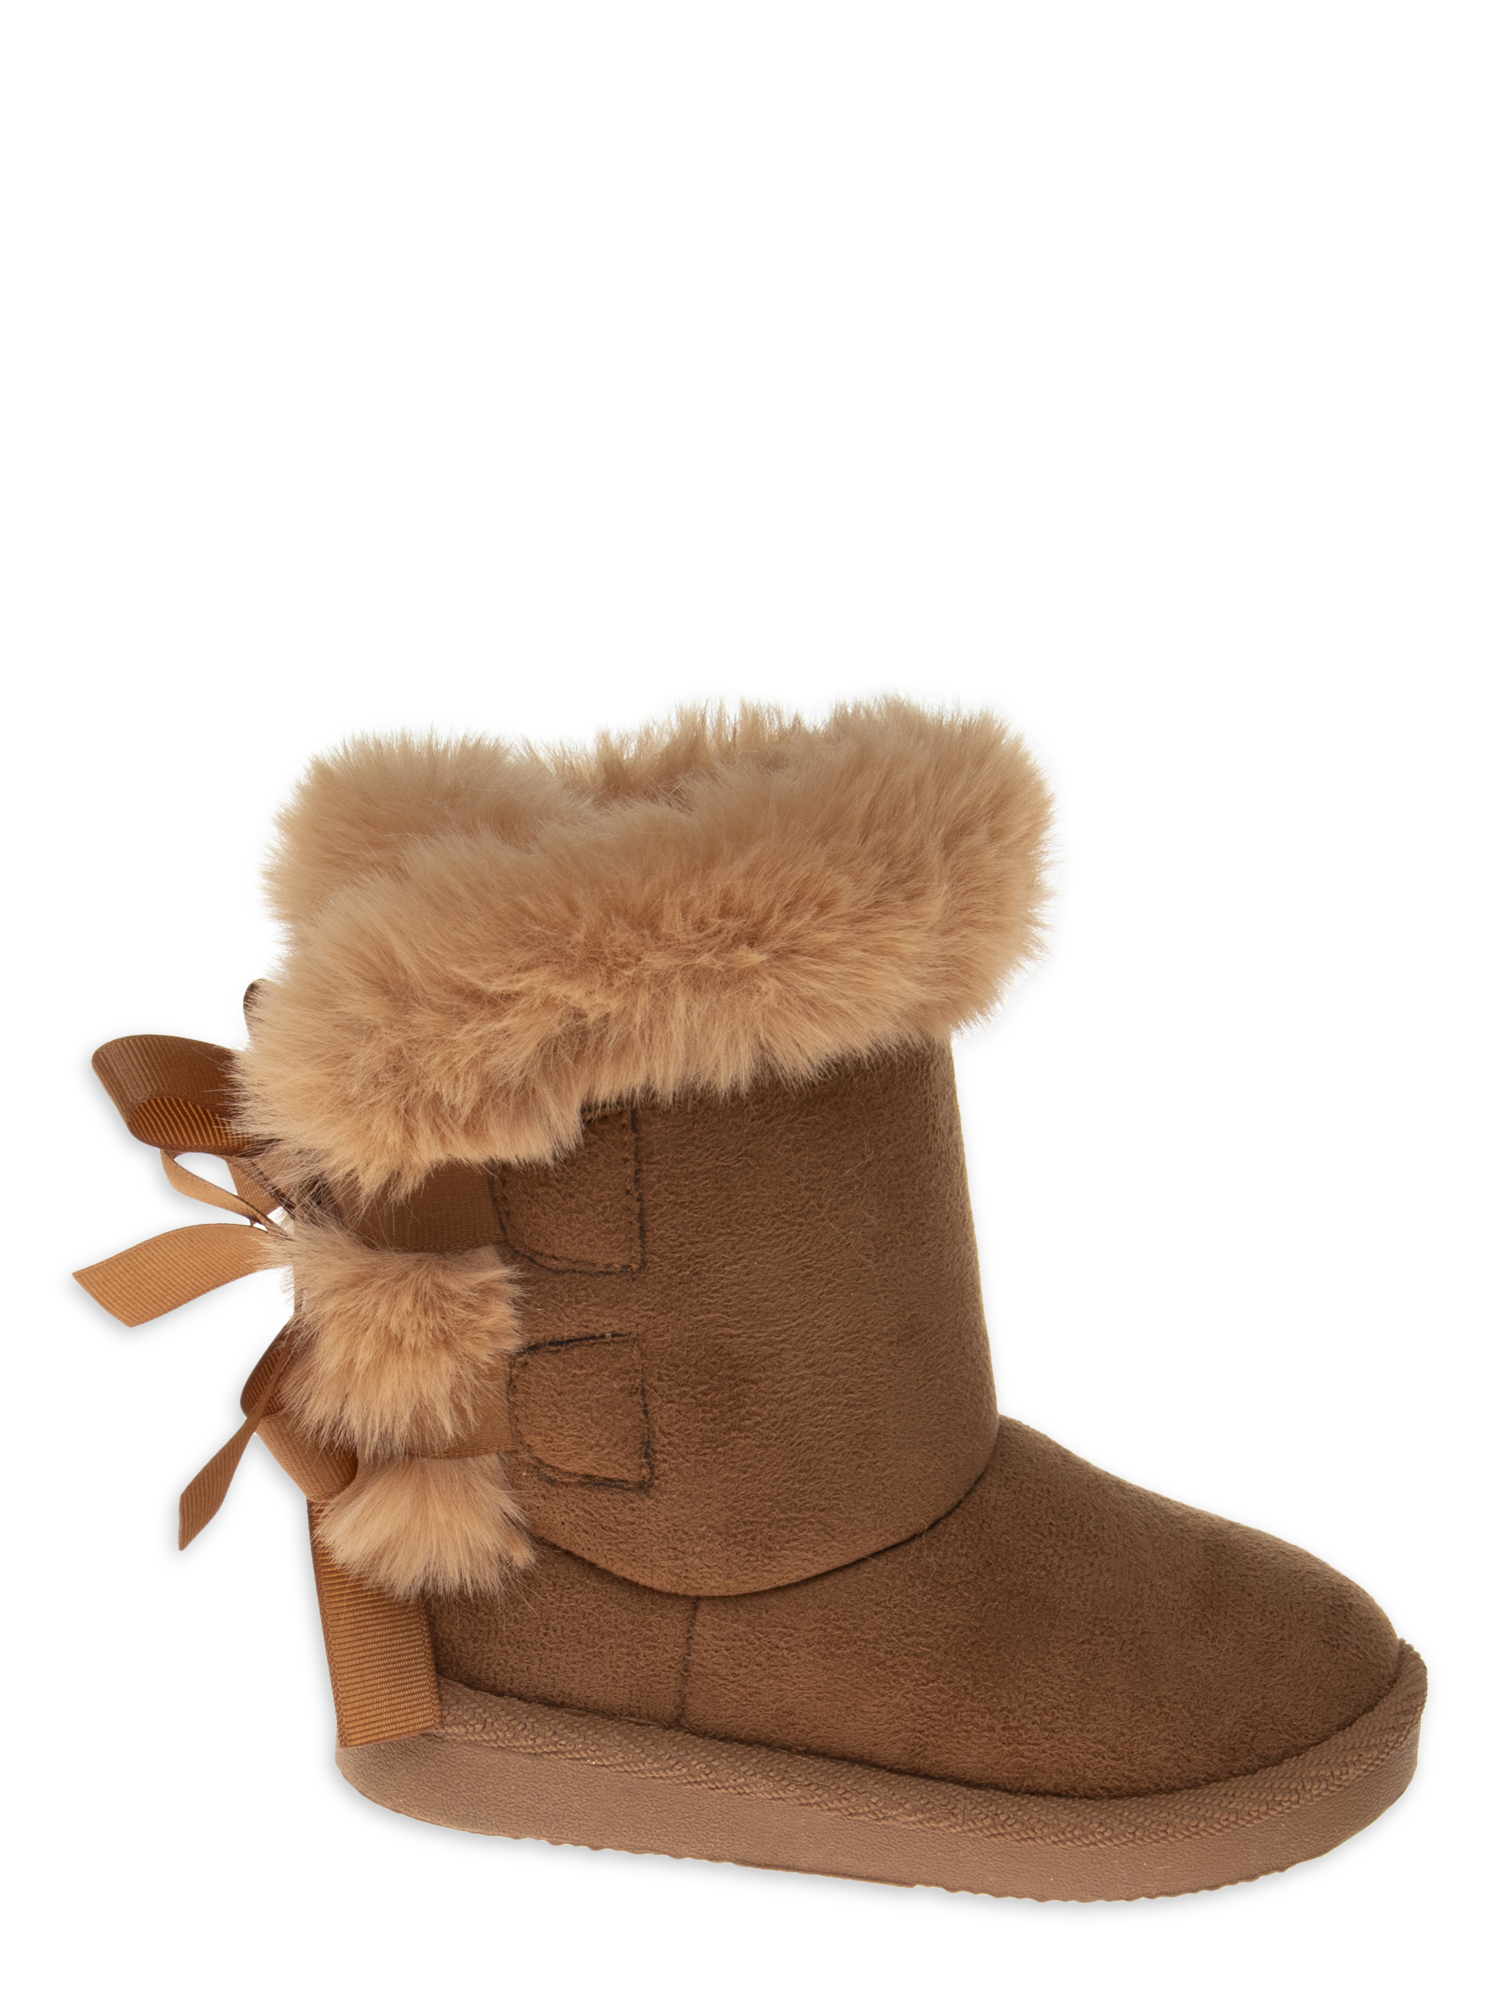 Josmo Toddler & Big Girls Faux Shearling Bow Boots - image 2 of 5